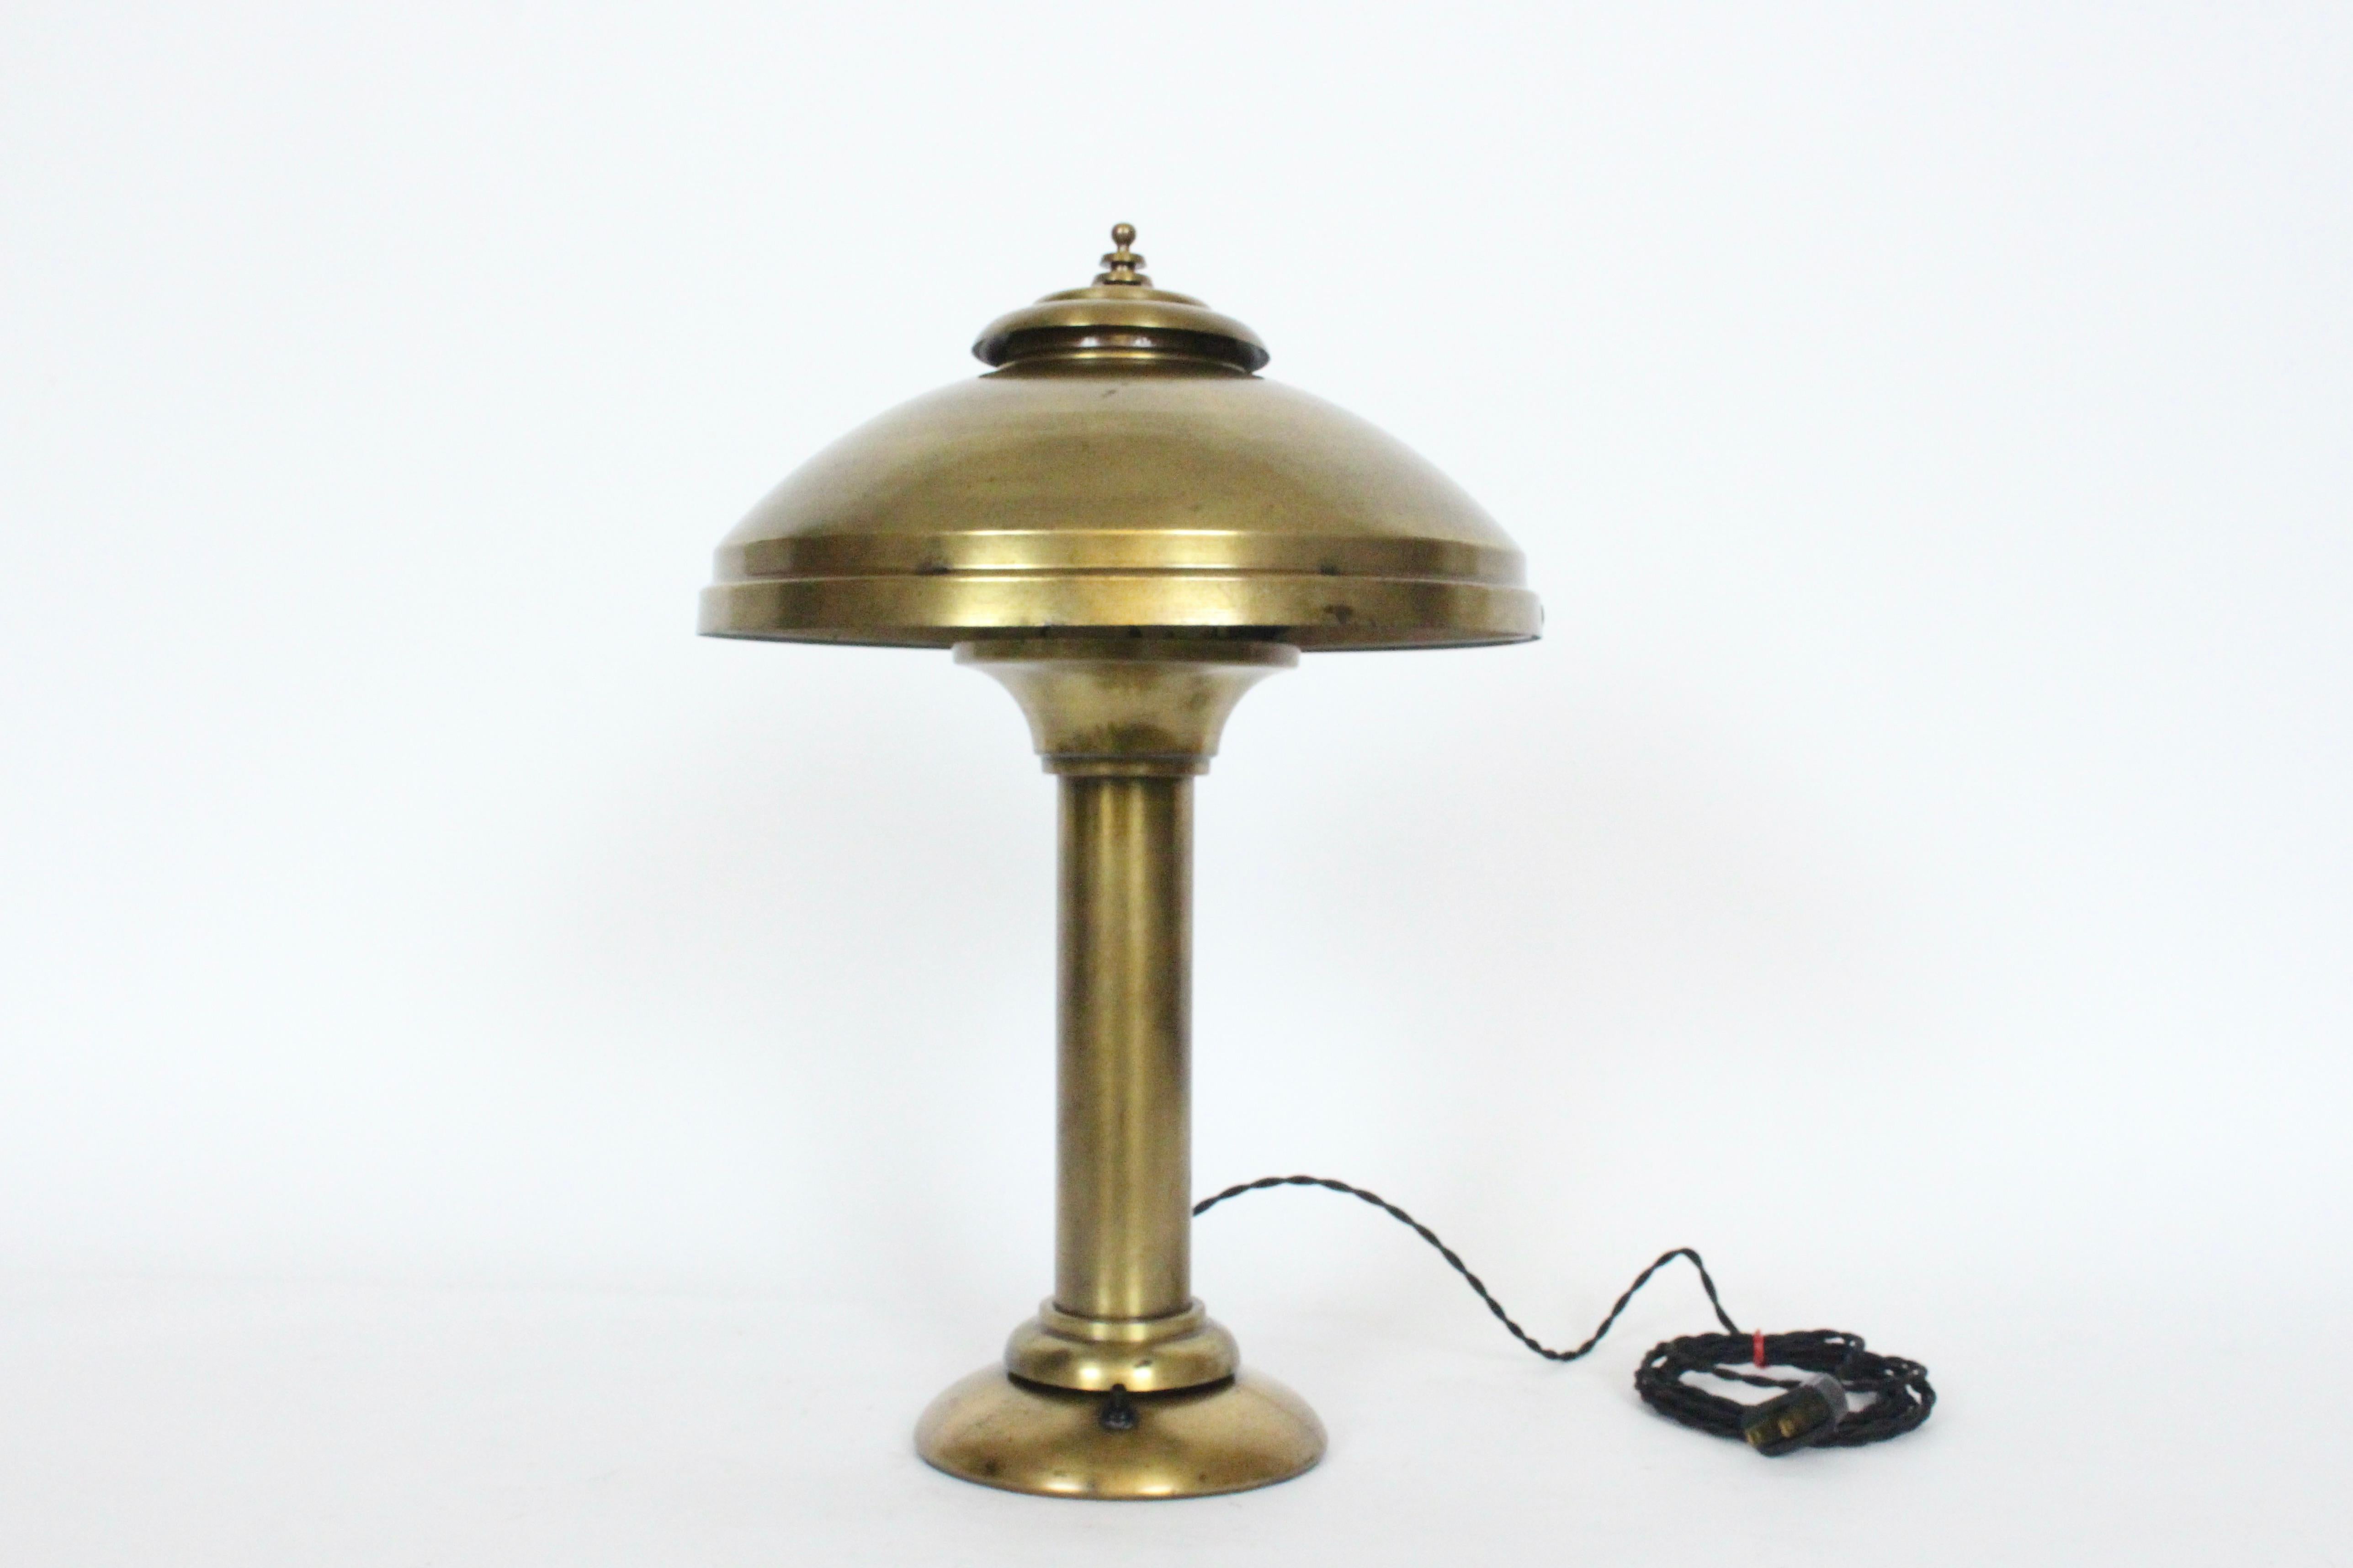 Late Art Deco Fairies Manufacturing Company brass desk lamp, table lamp circa 1920s. Featuring an overall yellow brass finish, wide cylinder stem with flared top, pivoting cantilever vented dome Hood (11D x 5D), atop a rounded weighted base. Tilts